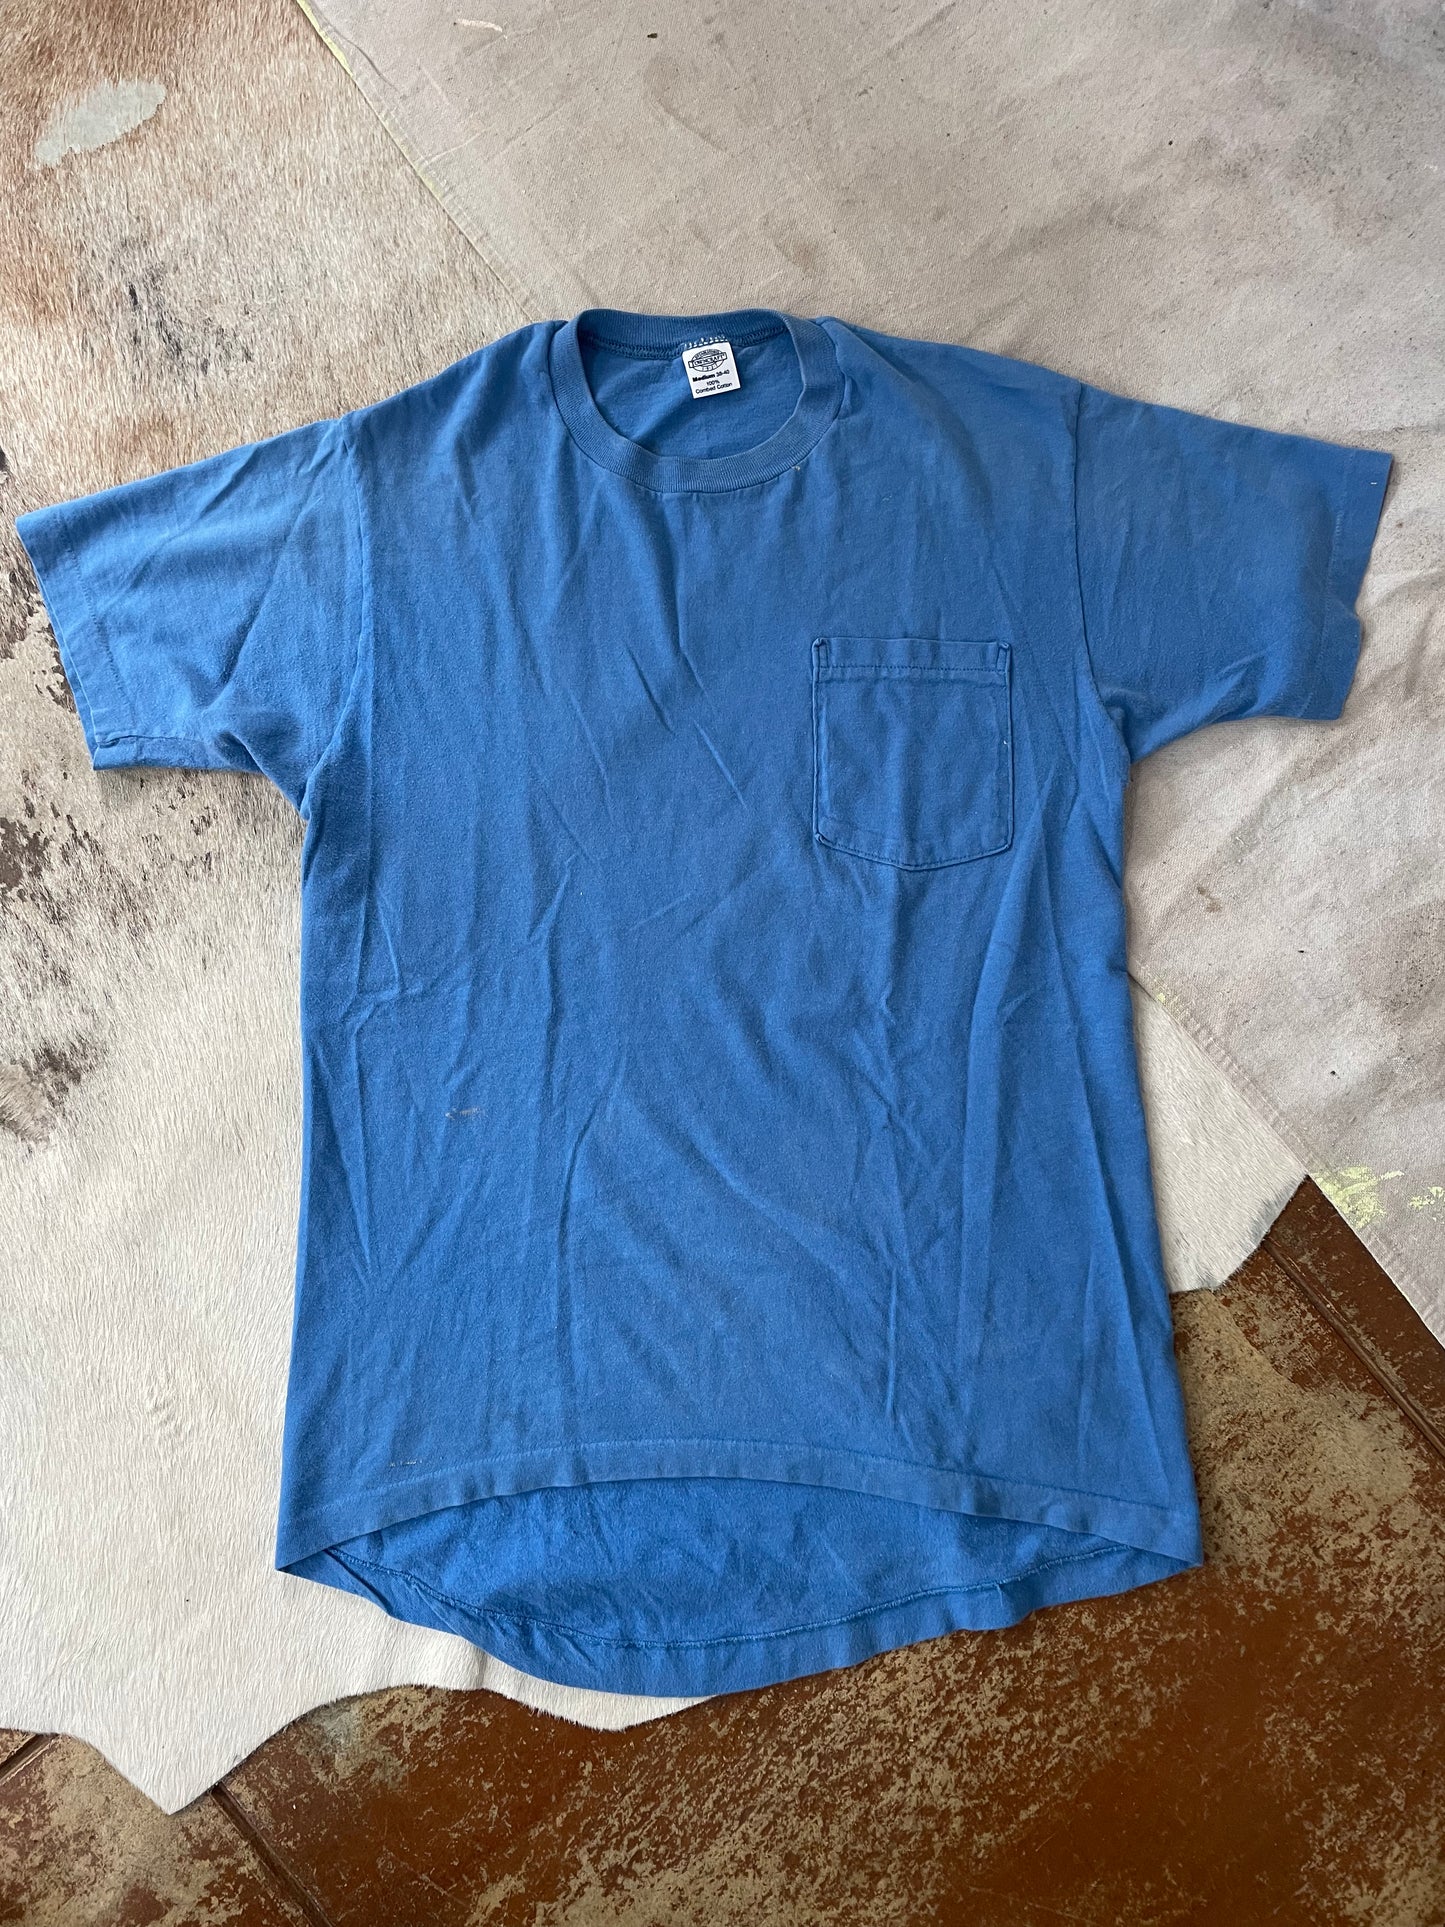 90s Blue Towncraft Pocket Tee